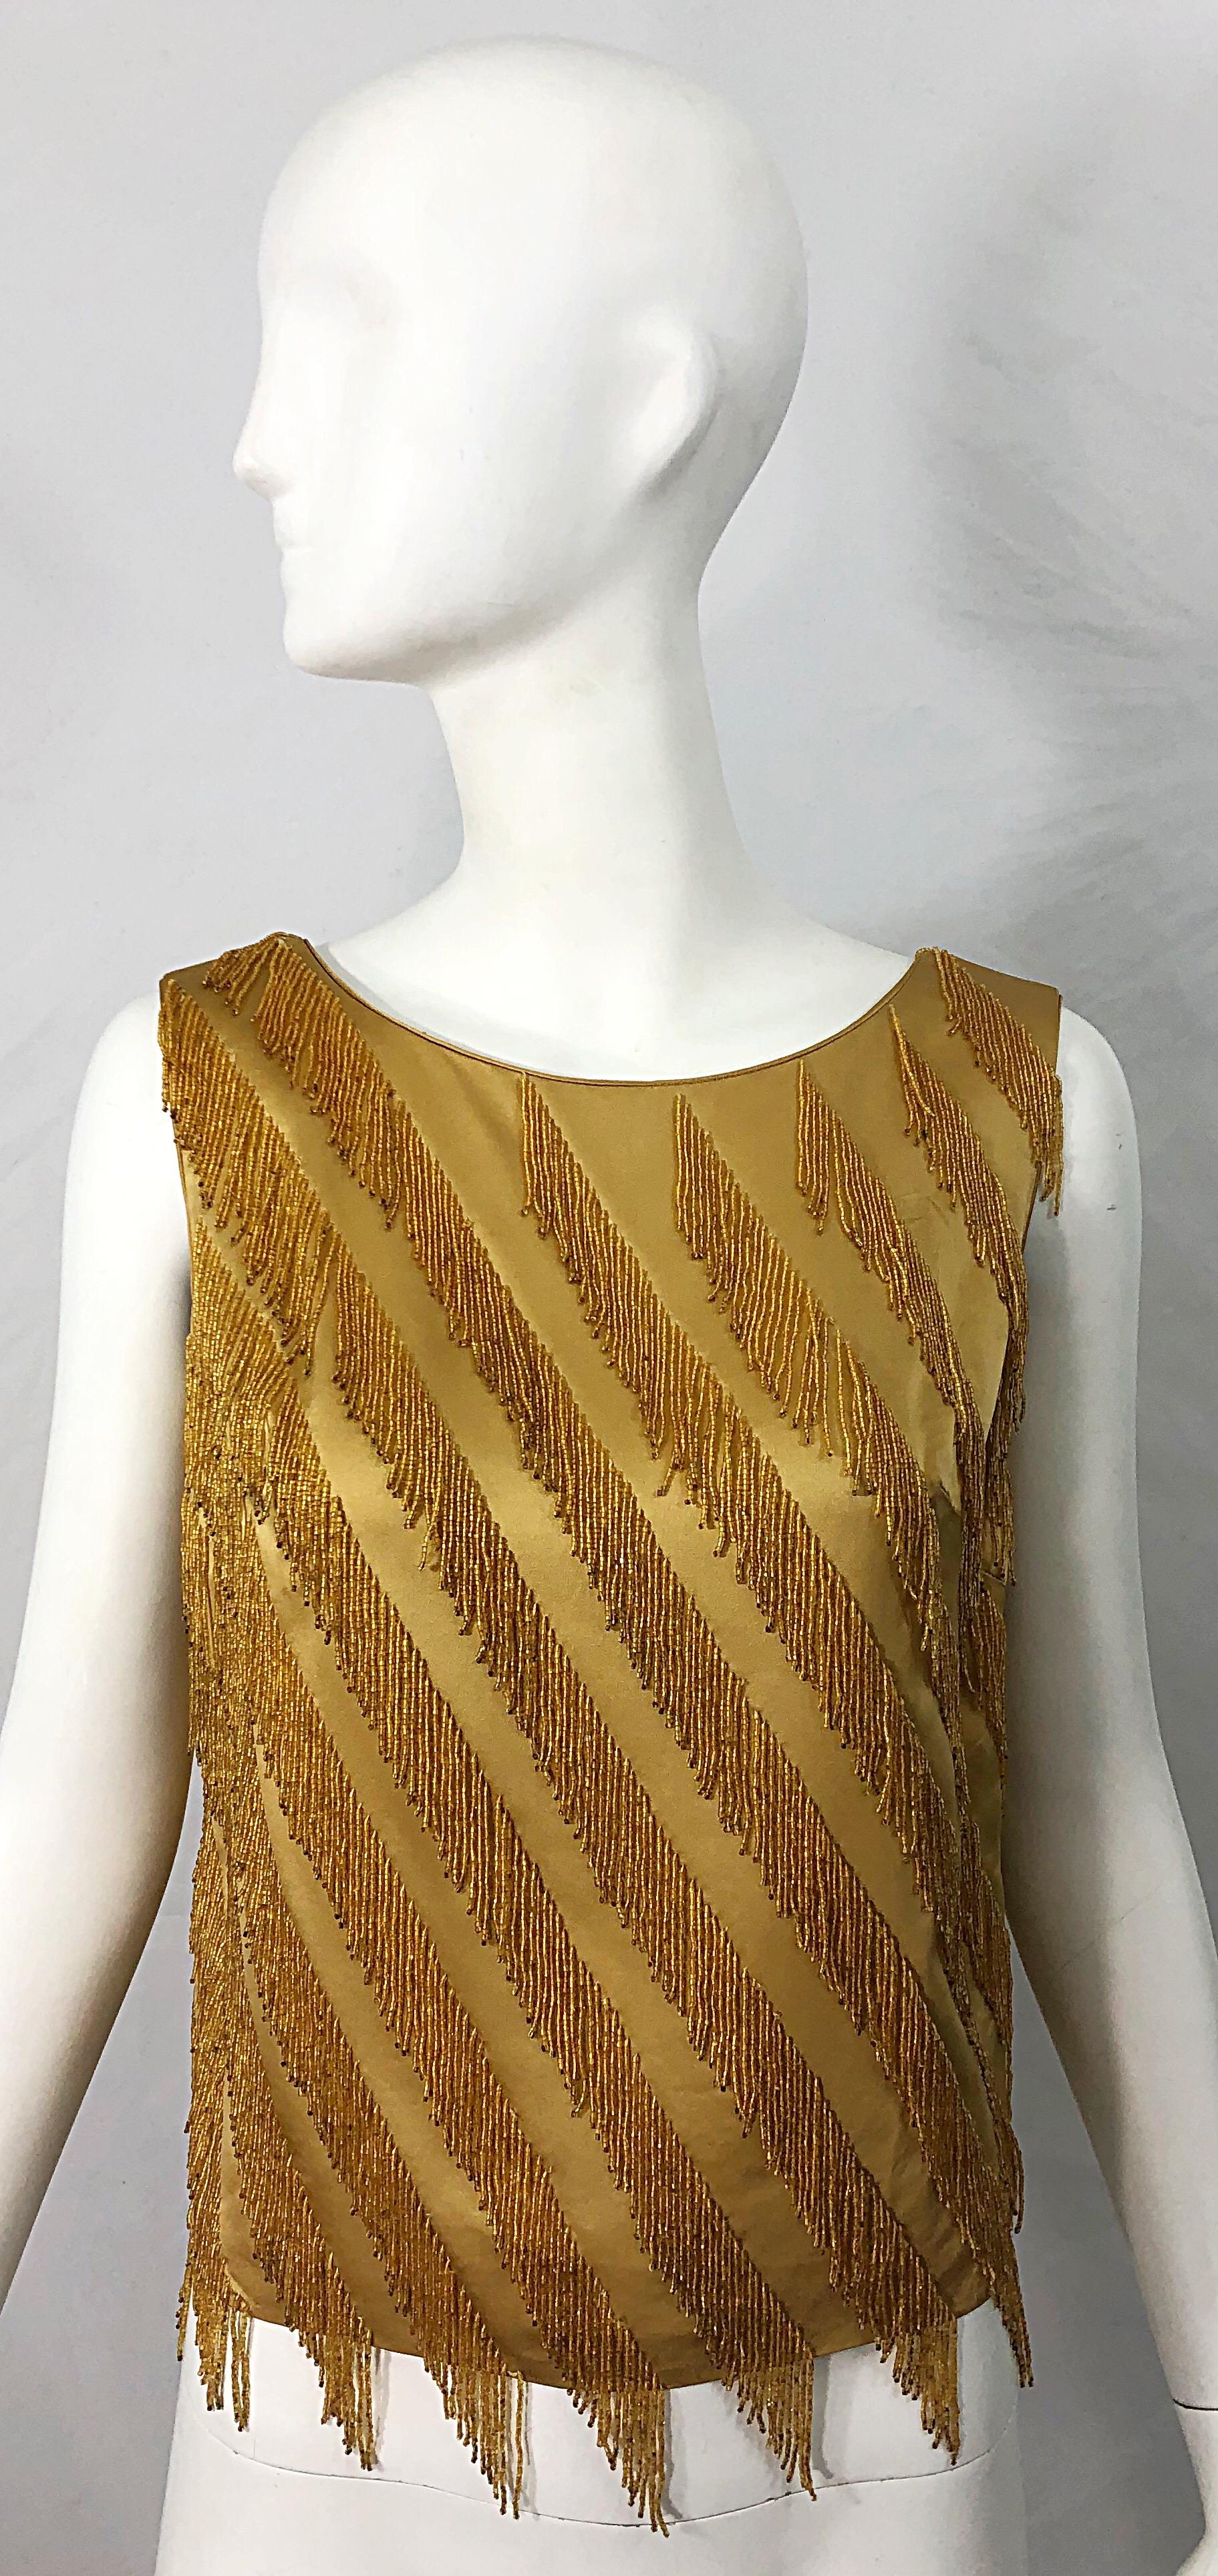 1960s Gene Shelly Gold Beaded Silk Rayon Vintage 60s Sleeveless Blouse Top For Sale 6